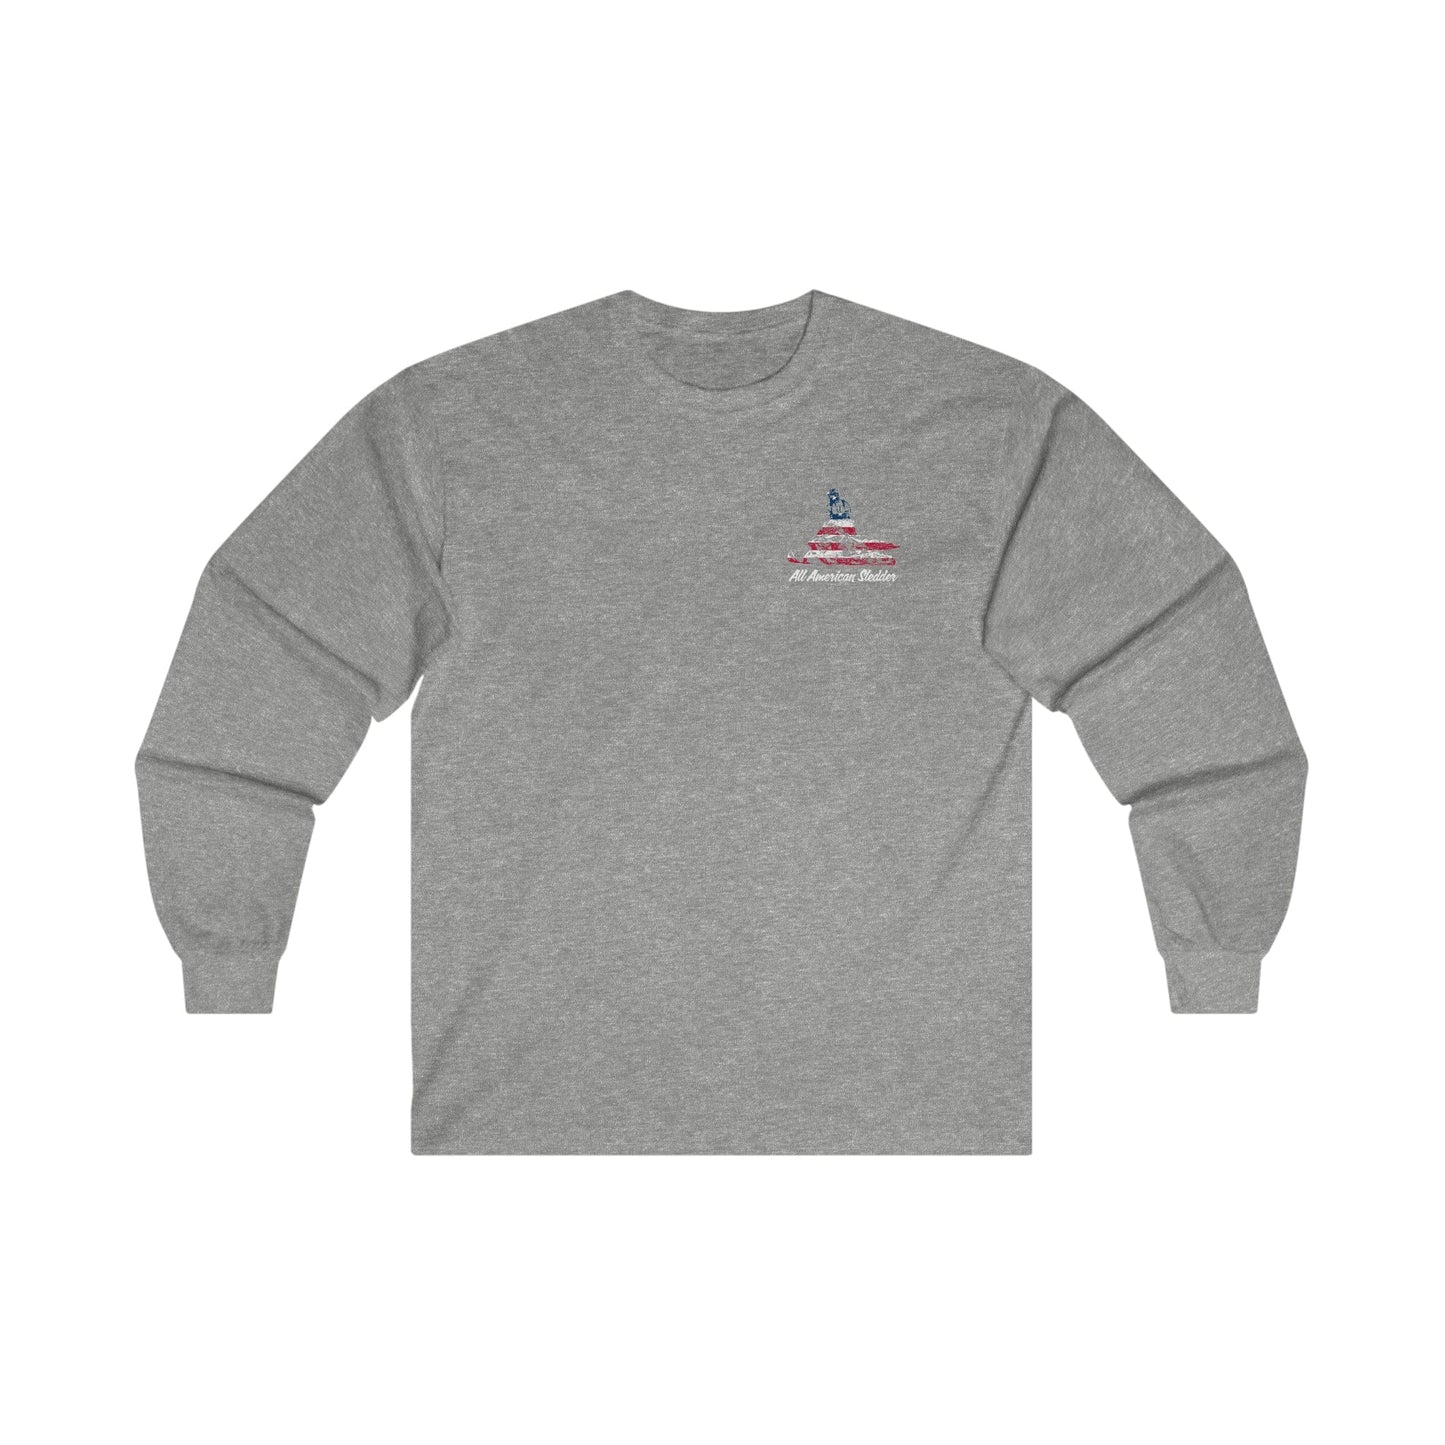 "Stay Frosty" AAHF/HC Collaboration Long Sleeve